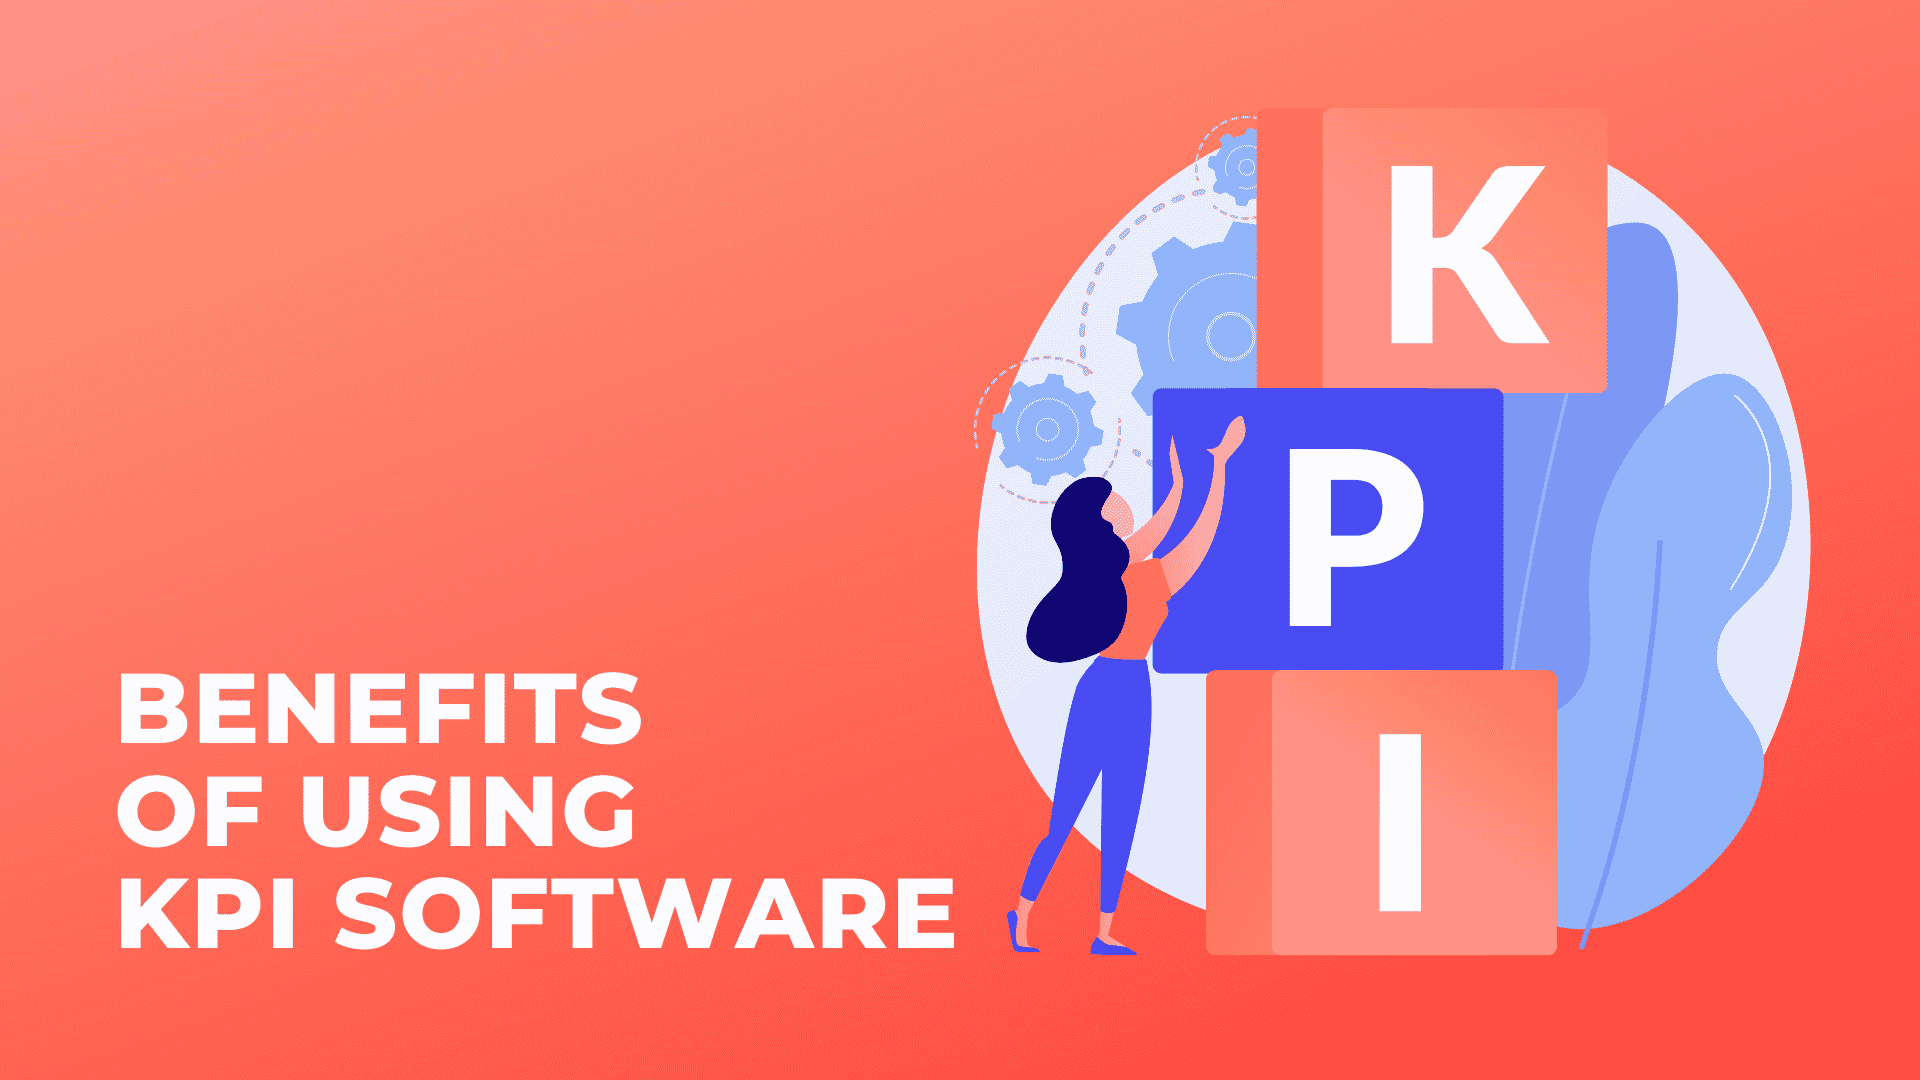 What are the benefits of using KPI software